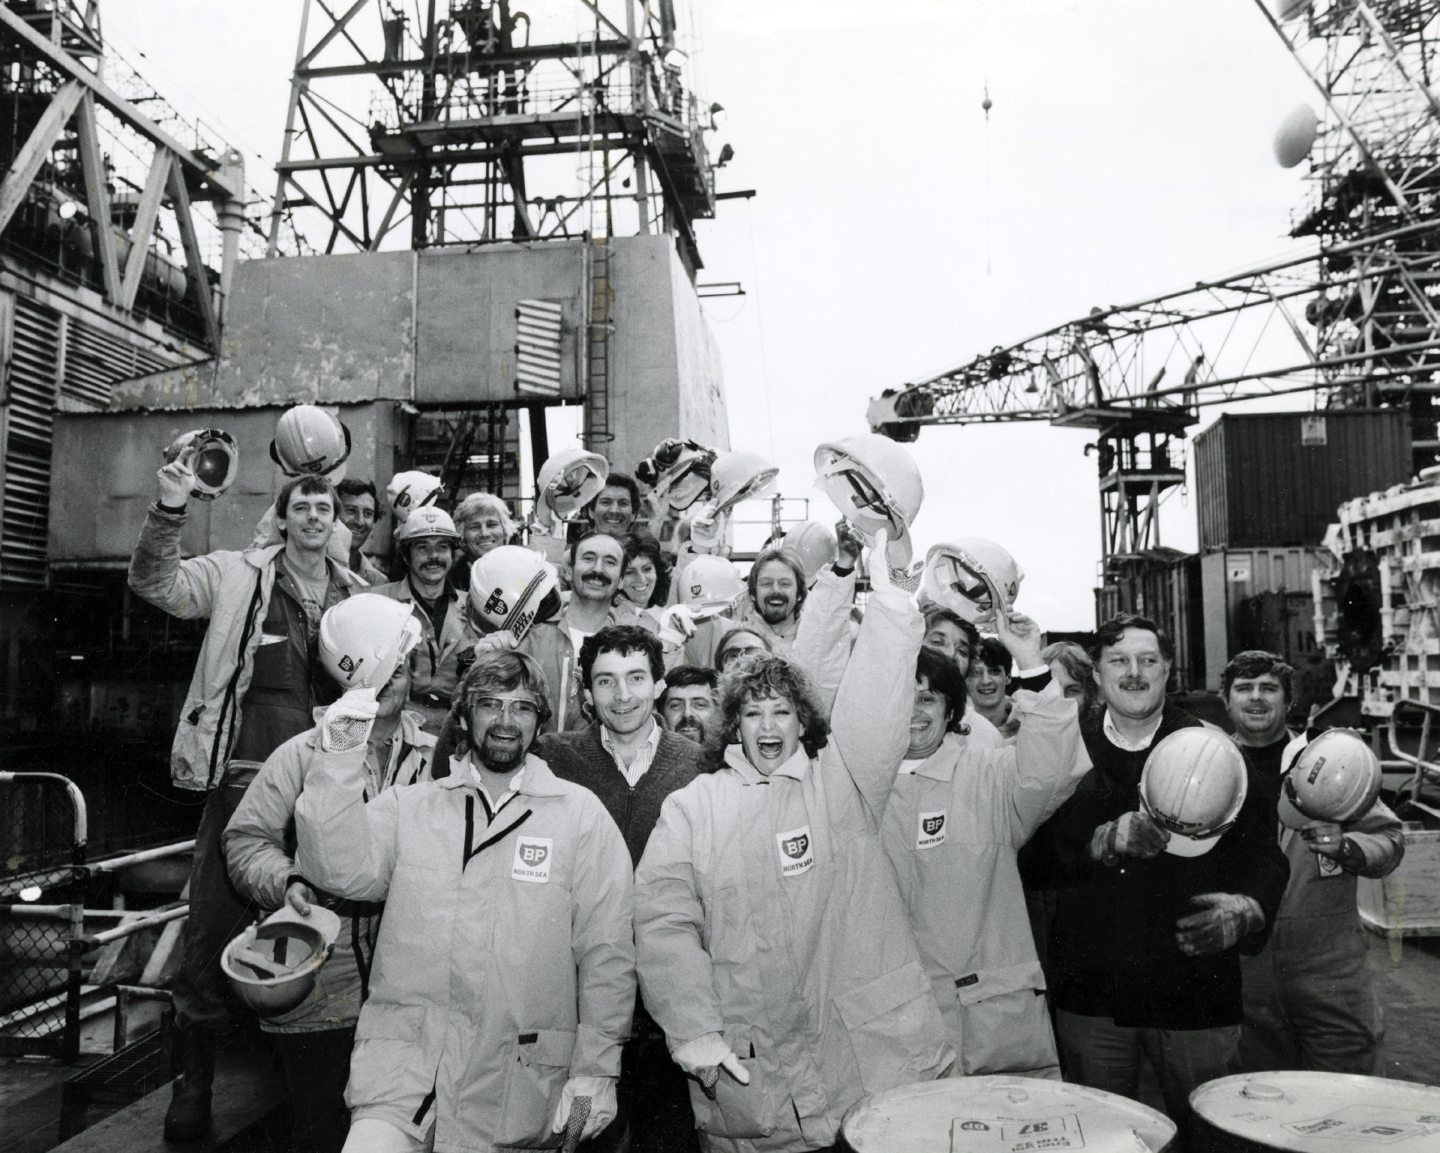 Barbara Dickson and Noel Edmonds visited an oil rig in the 1980s.